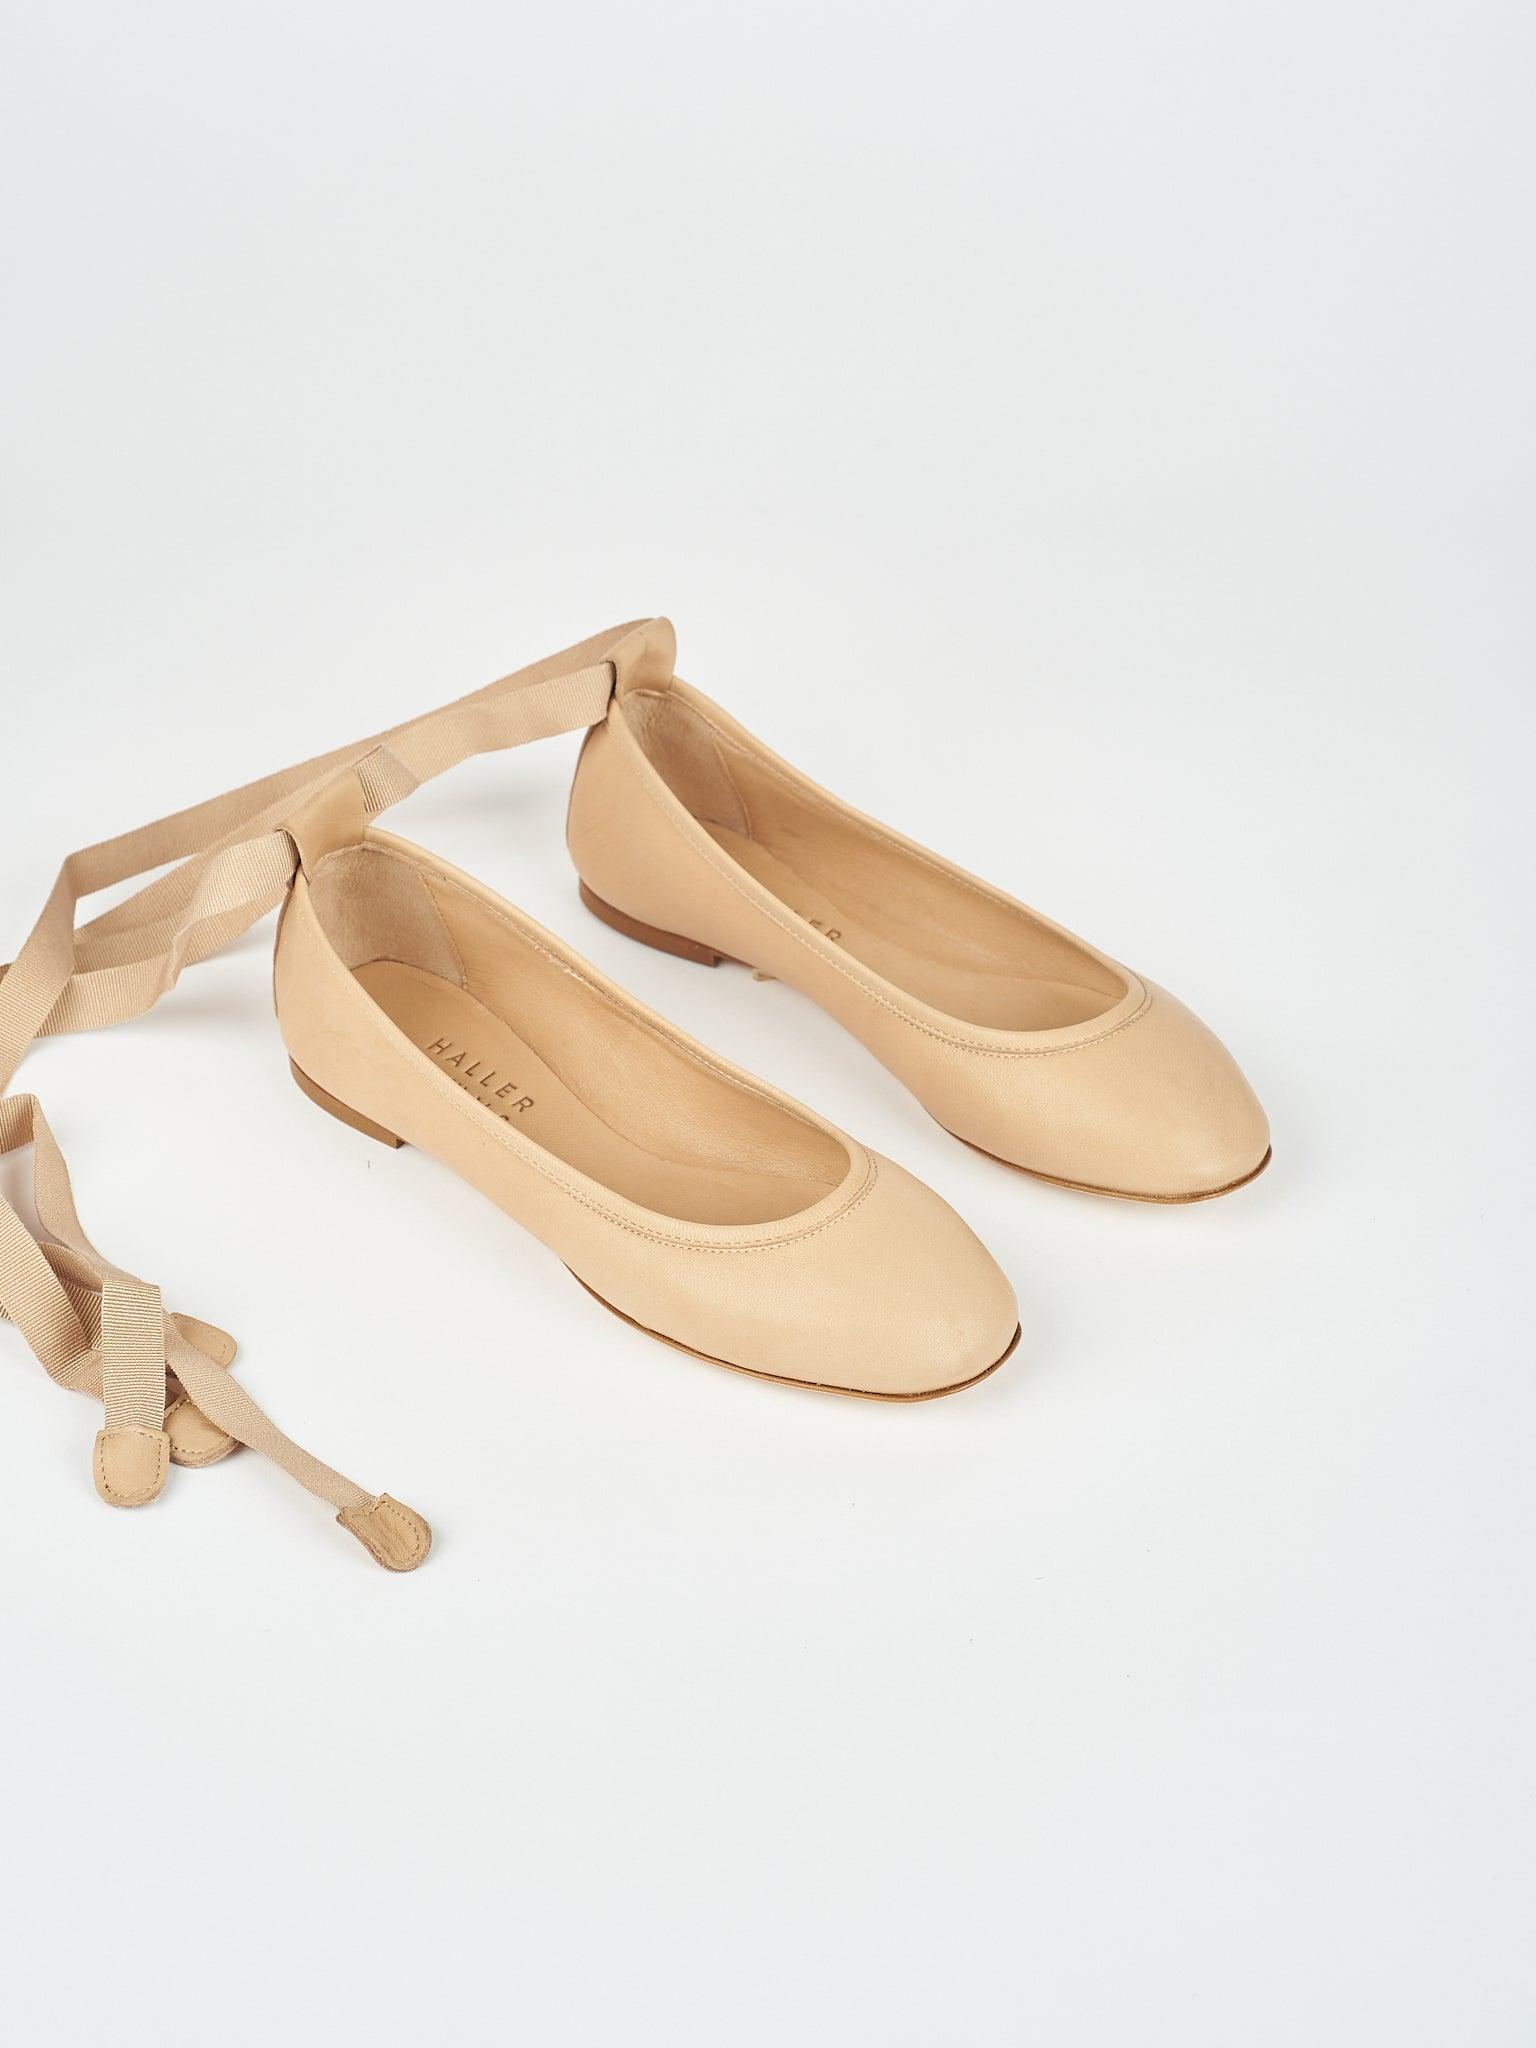 The Point Ballet in Soft Tan Angled Front View With Ties